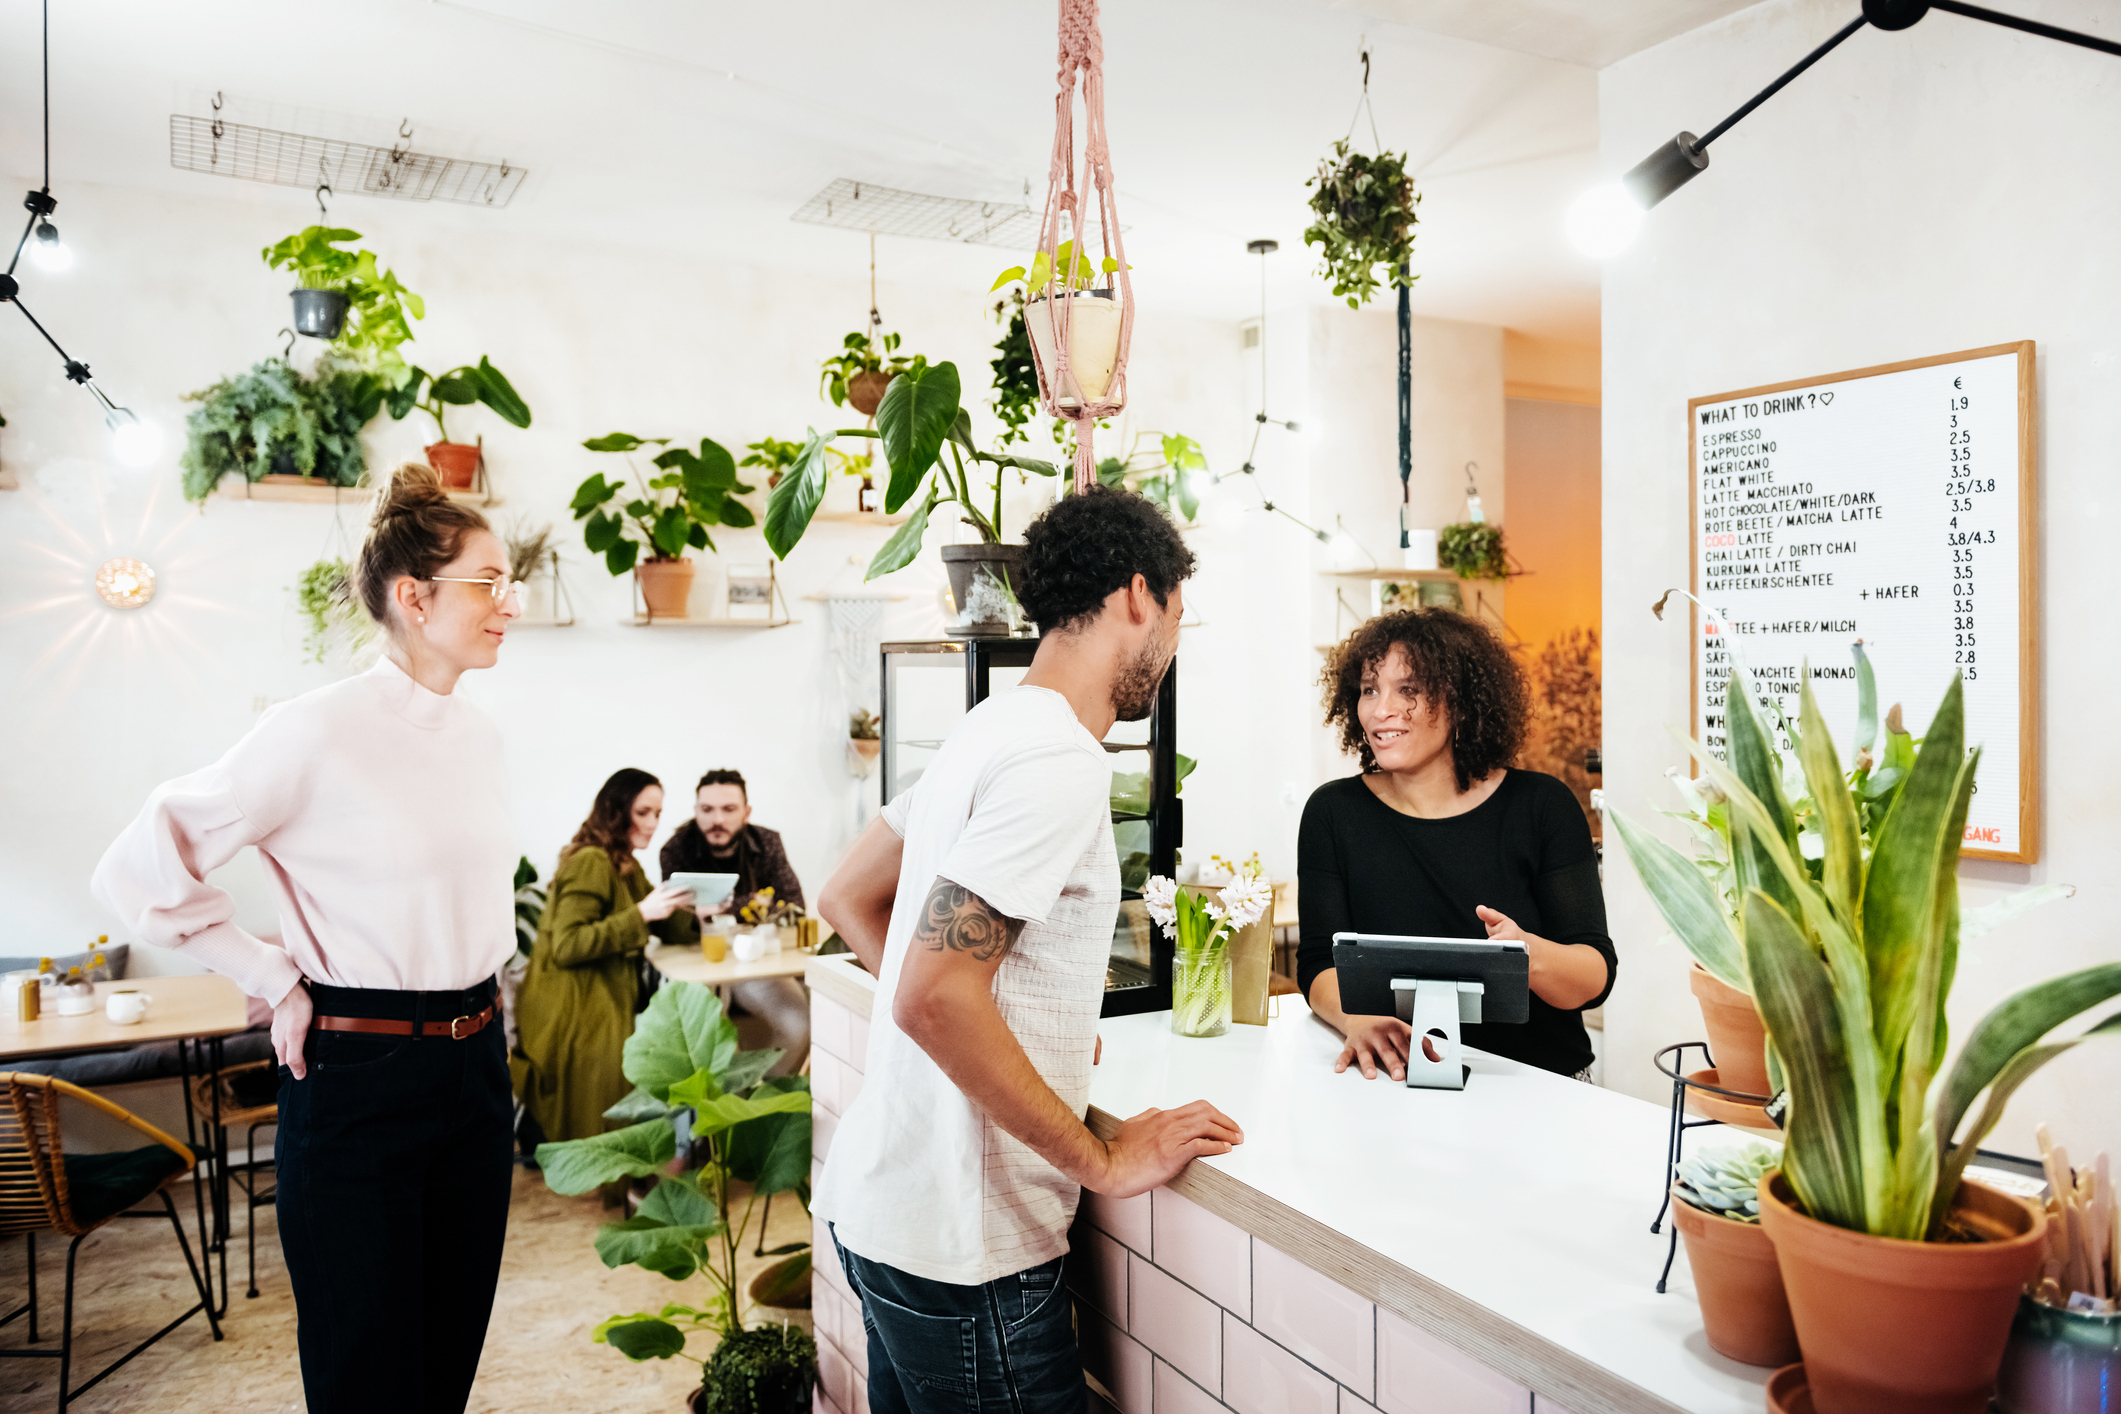 Person ordering at the counter of a cozy cafe with hanging plants and customers in the background. Menu board visible